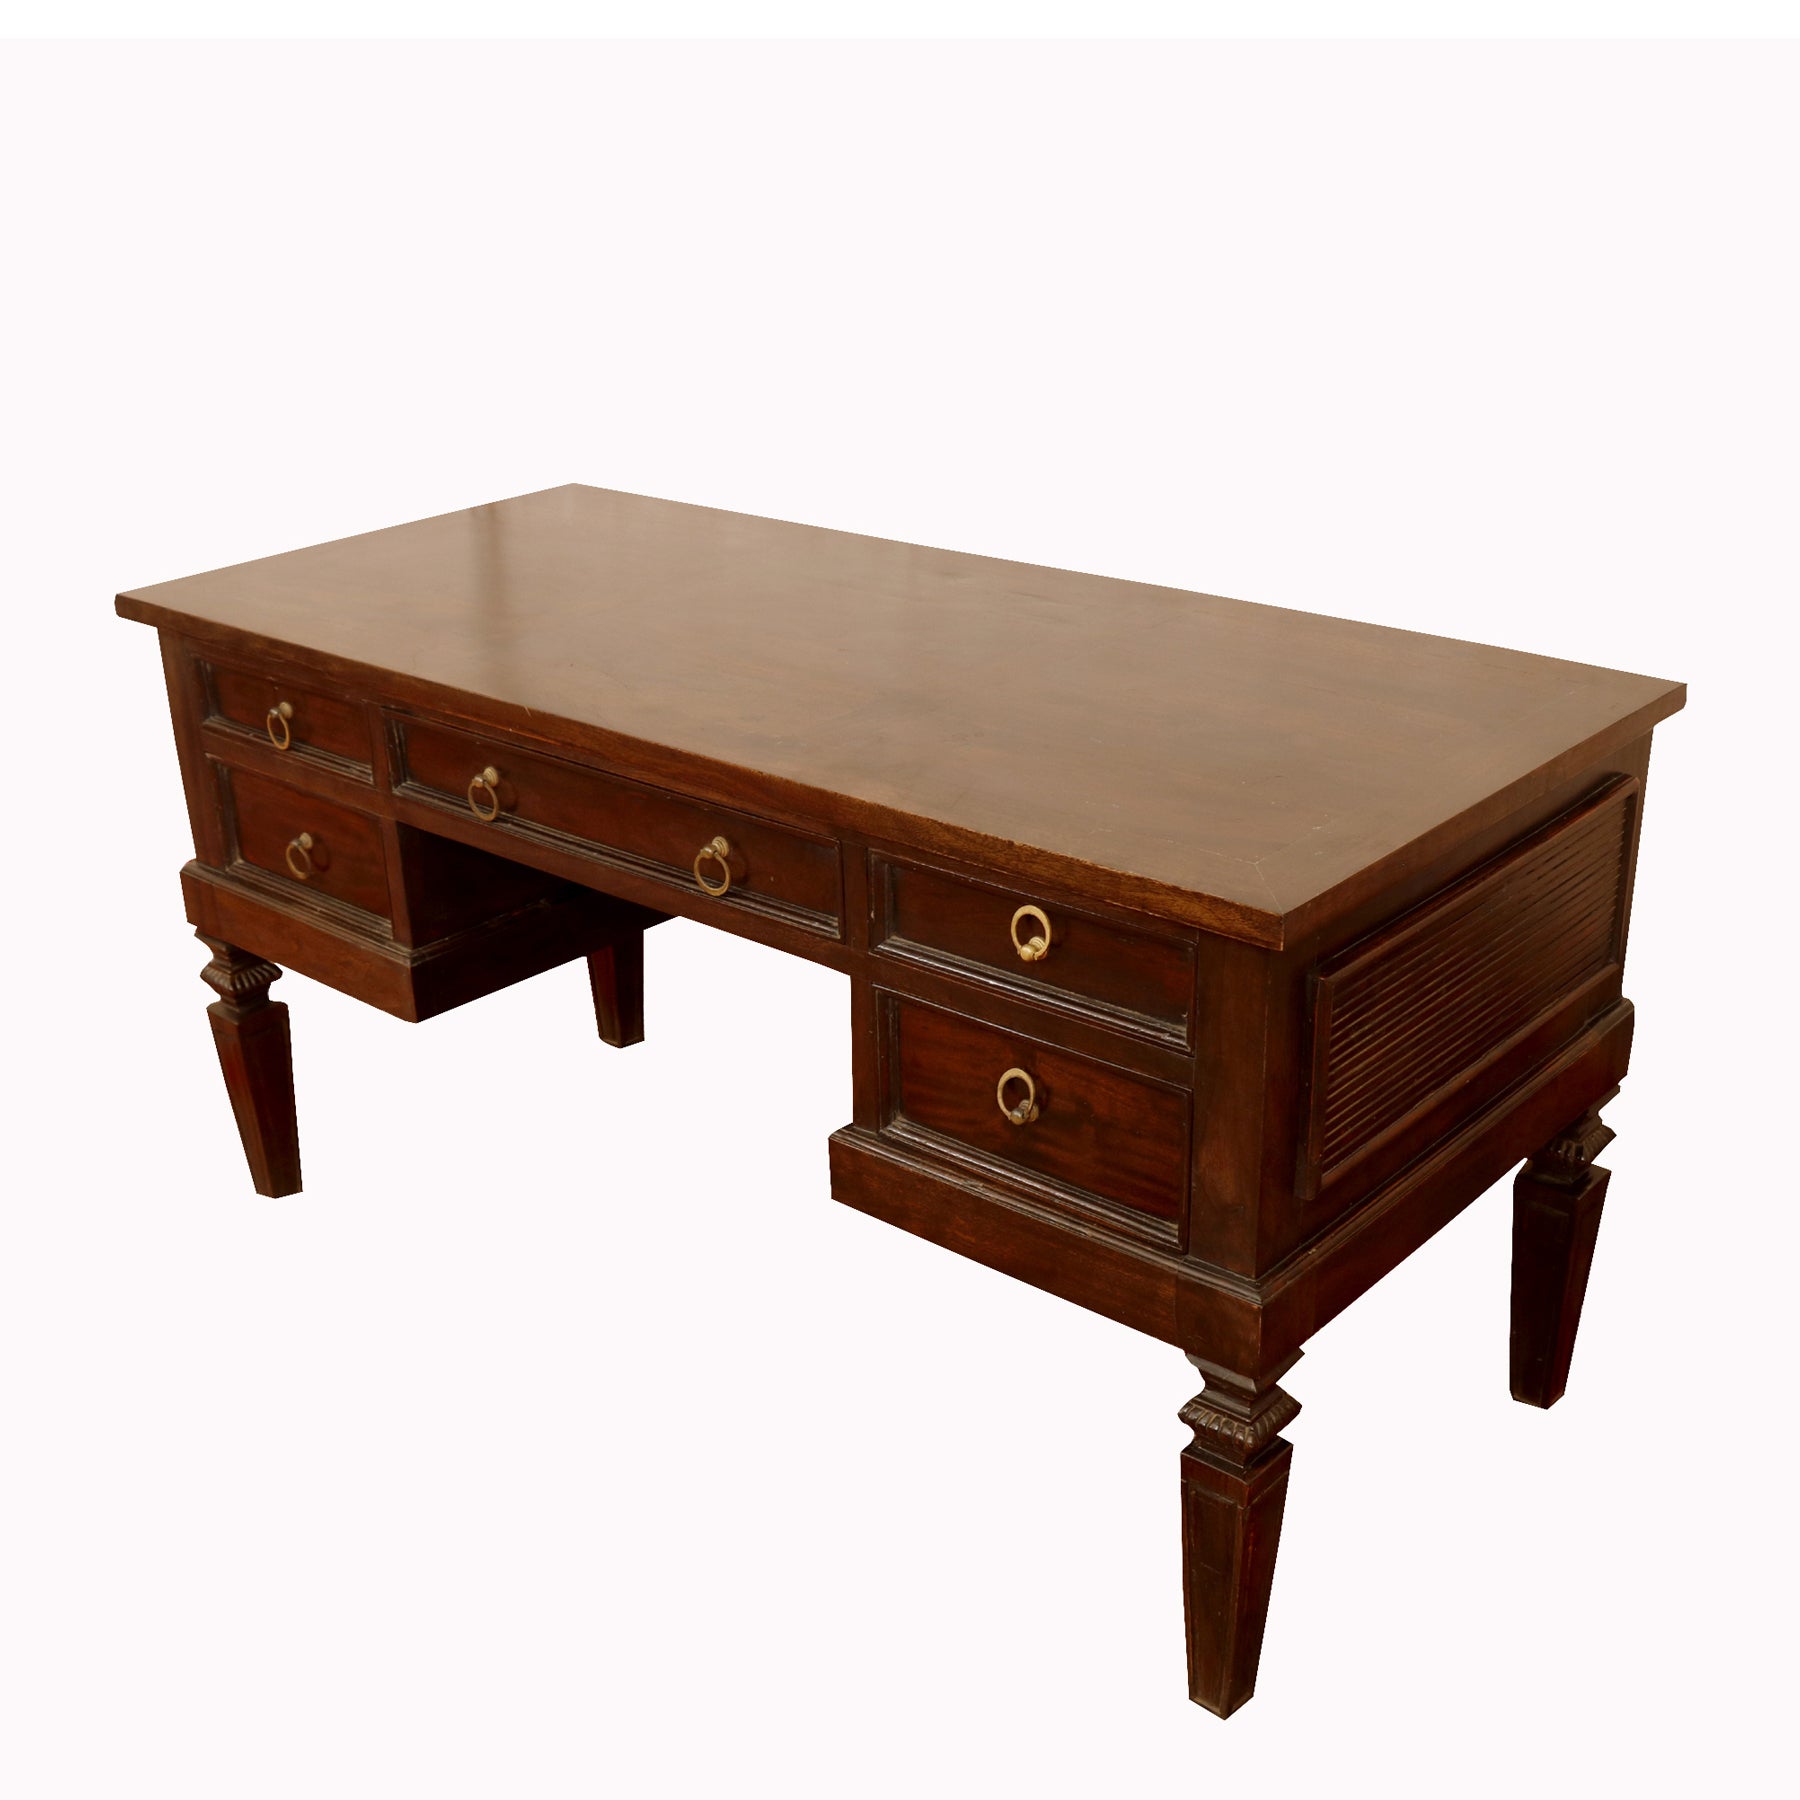 Country Style Study & Office Table Study Table